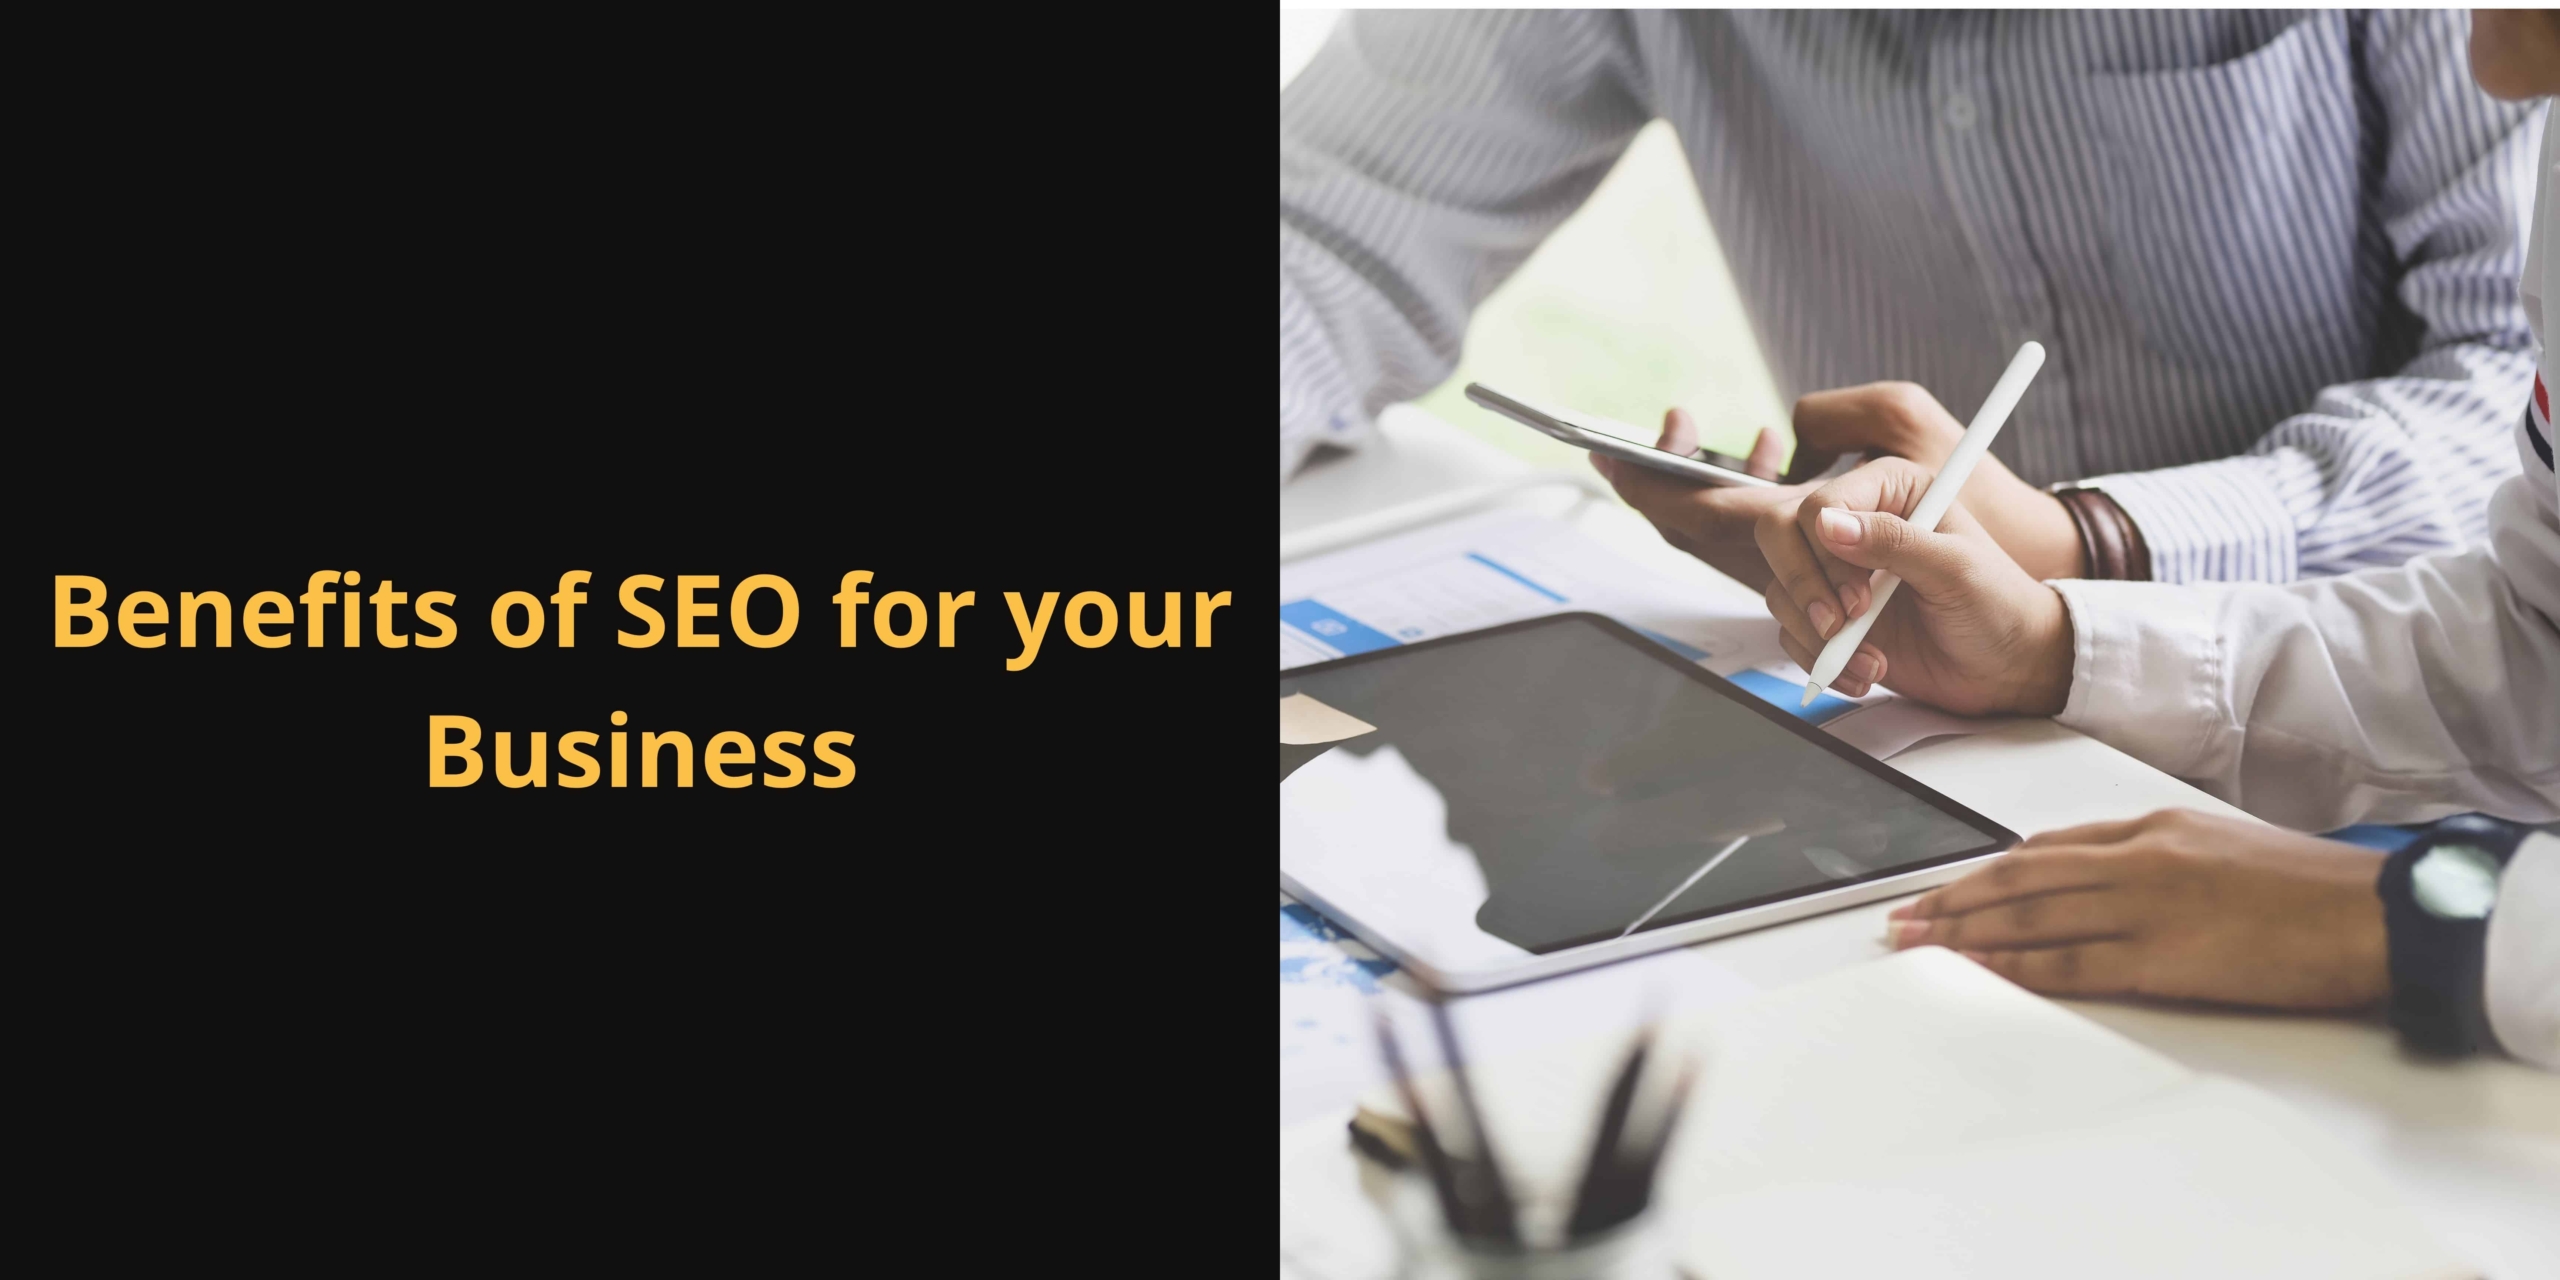 Benefits of-seo for your business